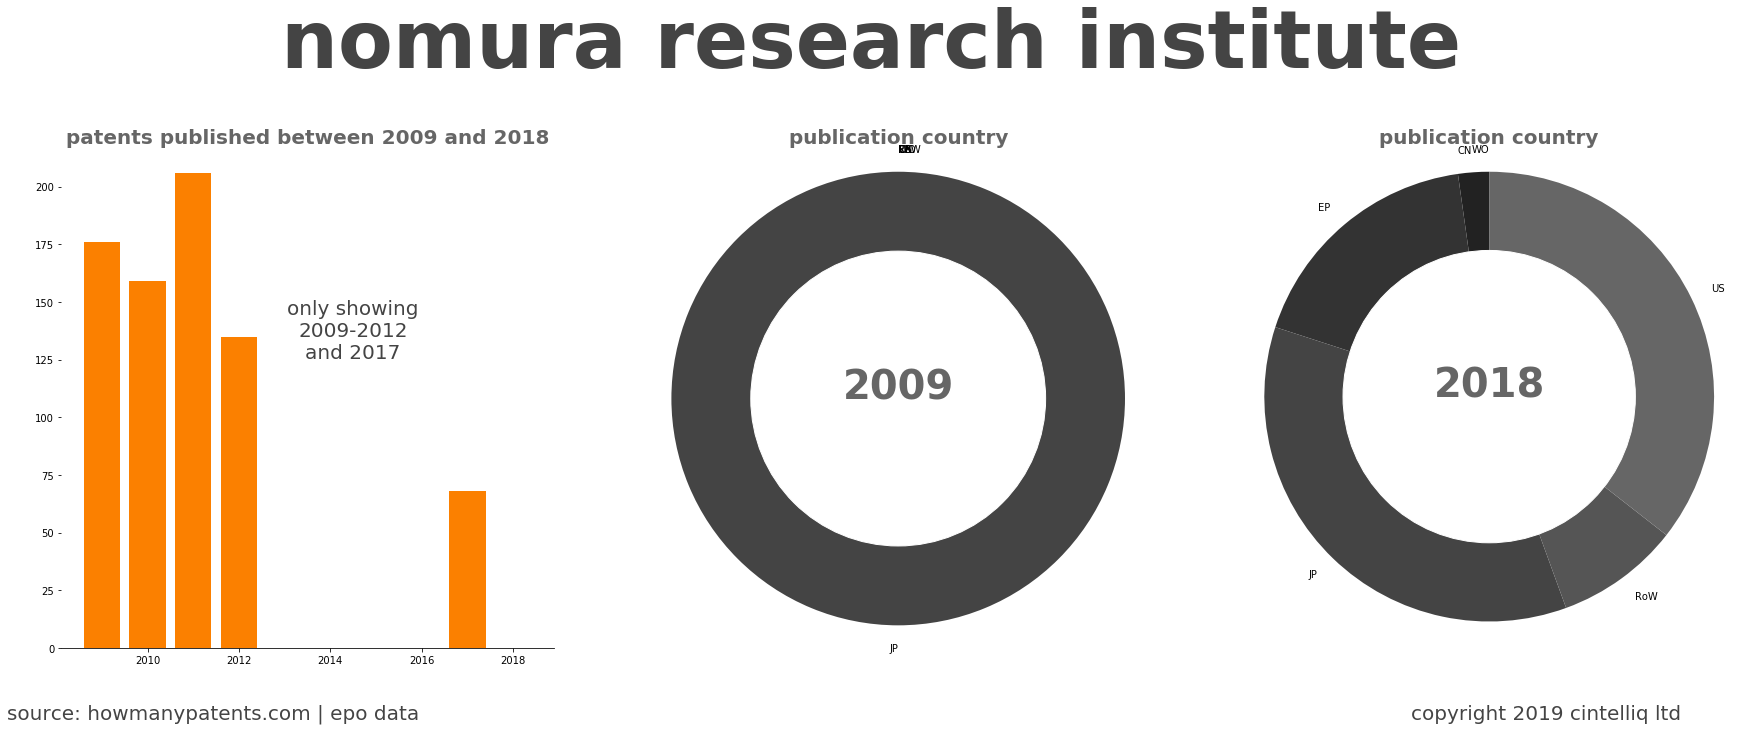 summary of patents for Nomura Research Institute